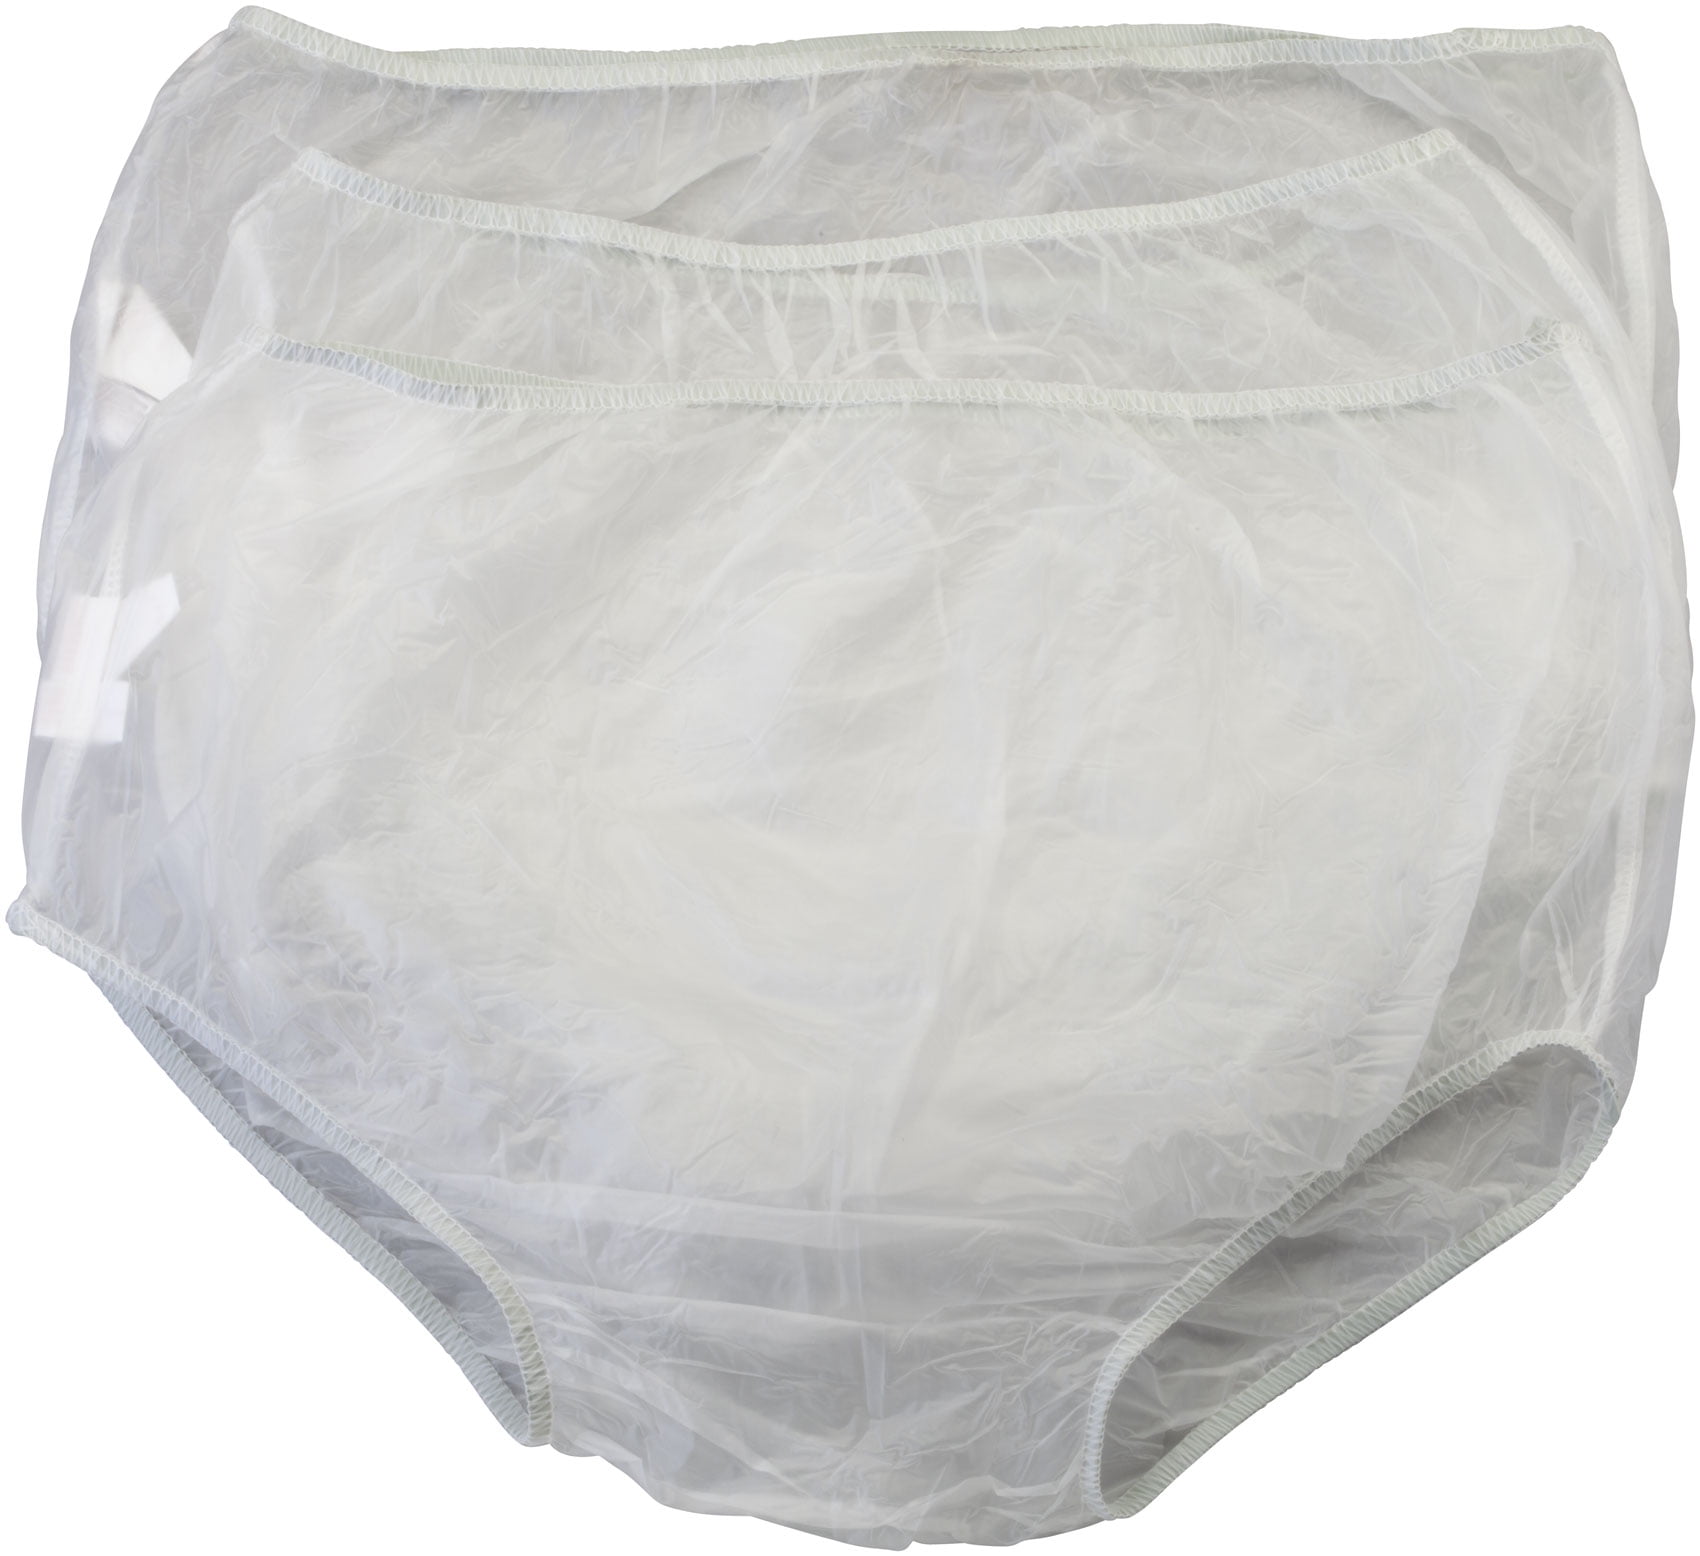 Incontinence Plastic Panties Png